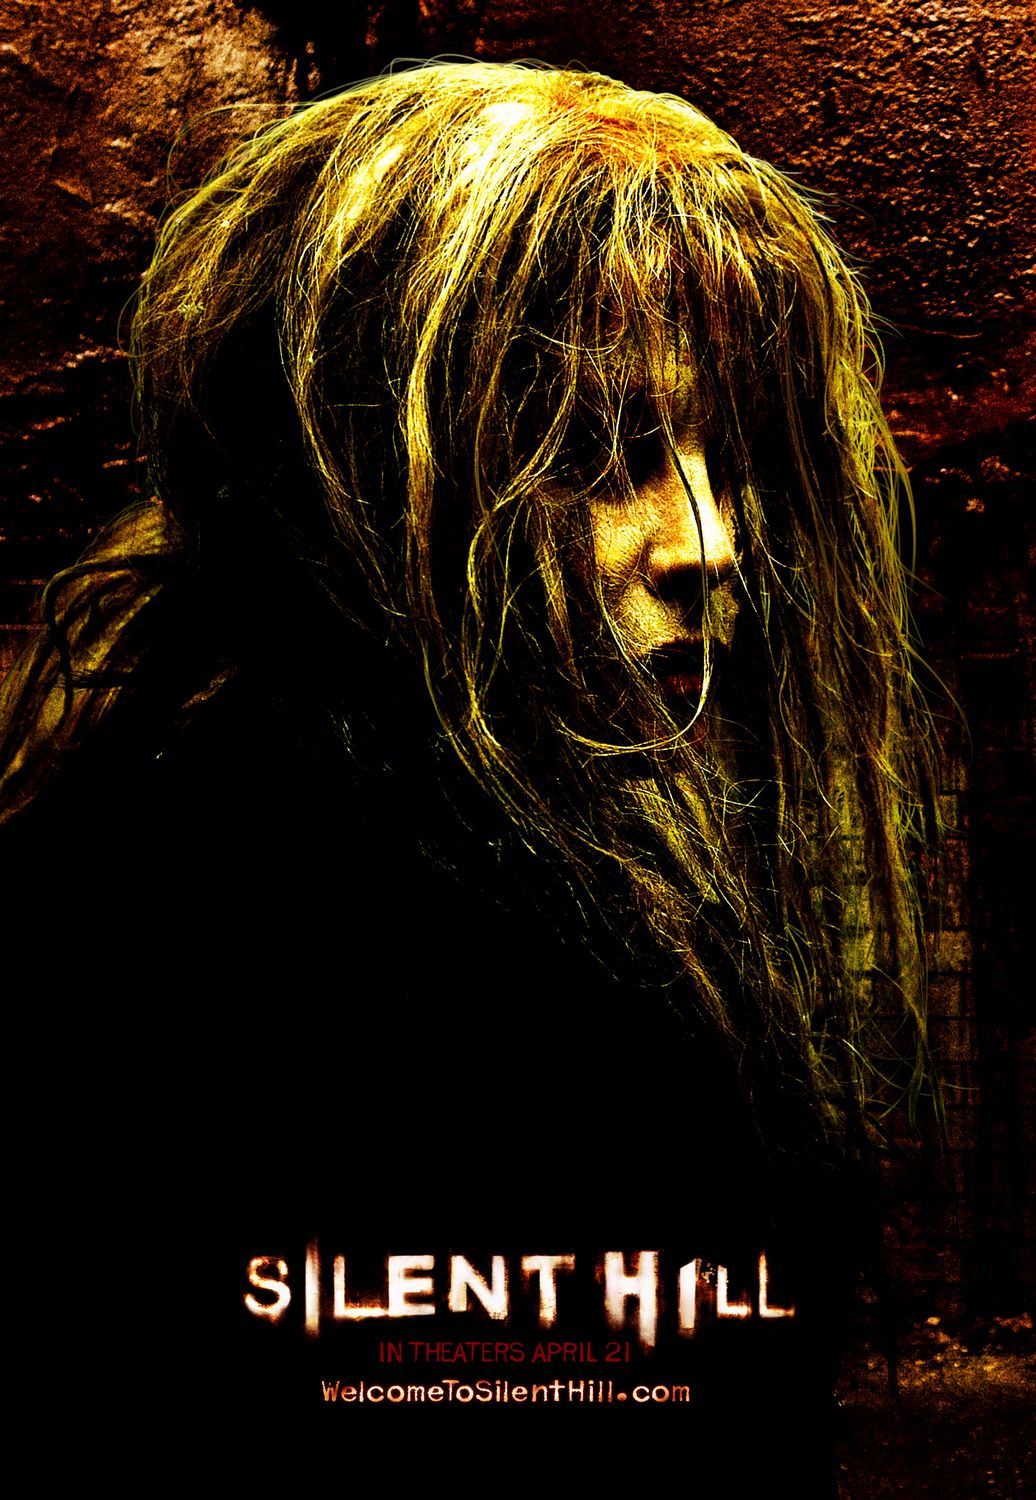 Extra Large Movie Poster Image for Silent Hill (#8 of 11)